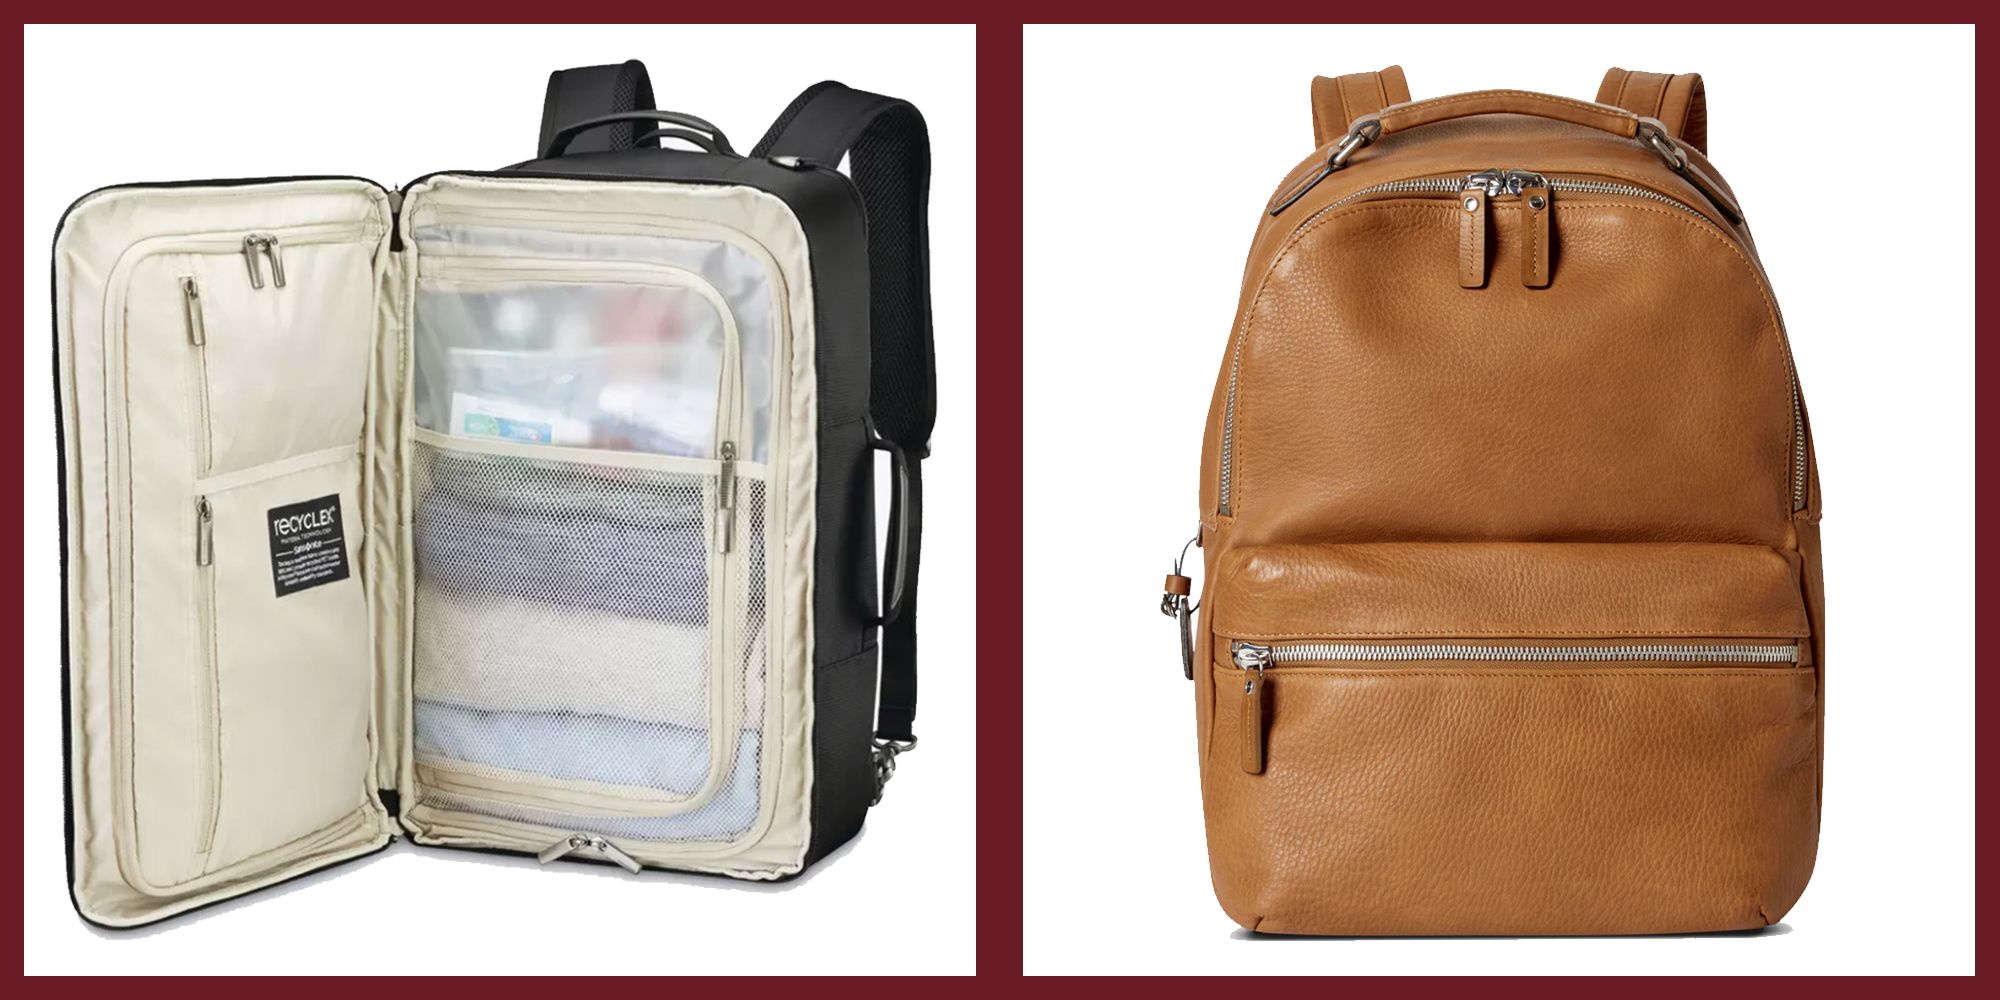 Clever Carry-On Backpacks That Take the Guesswork Out of Packing